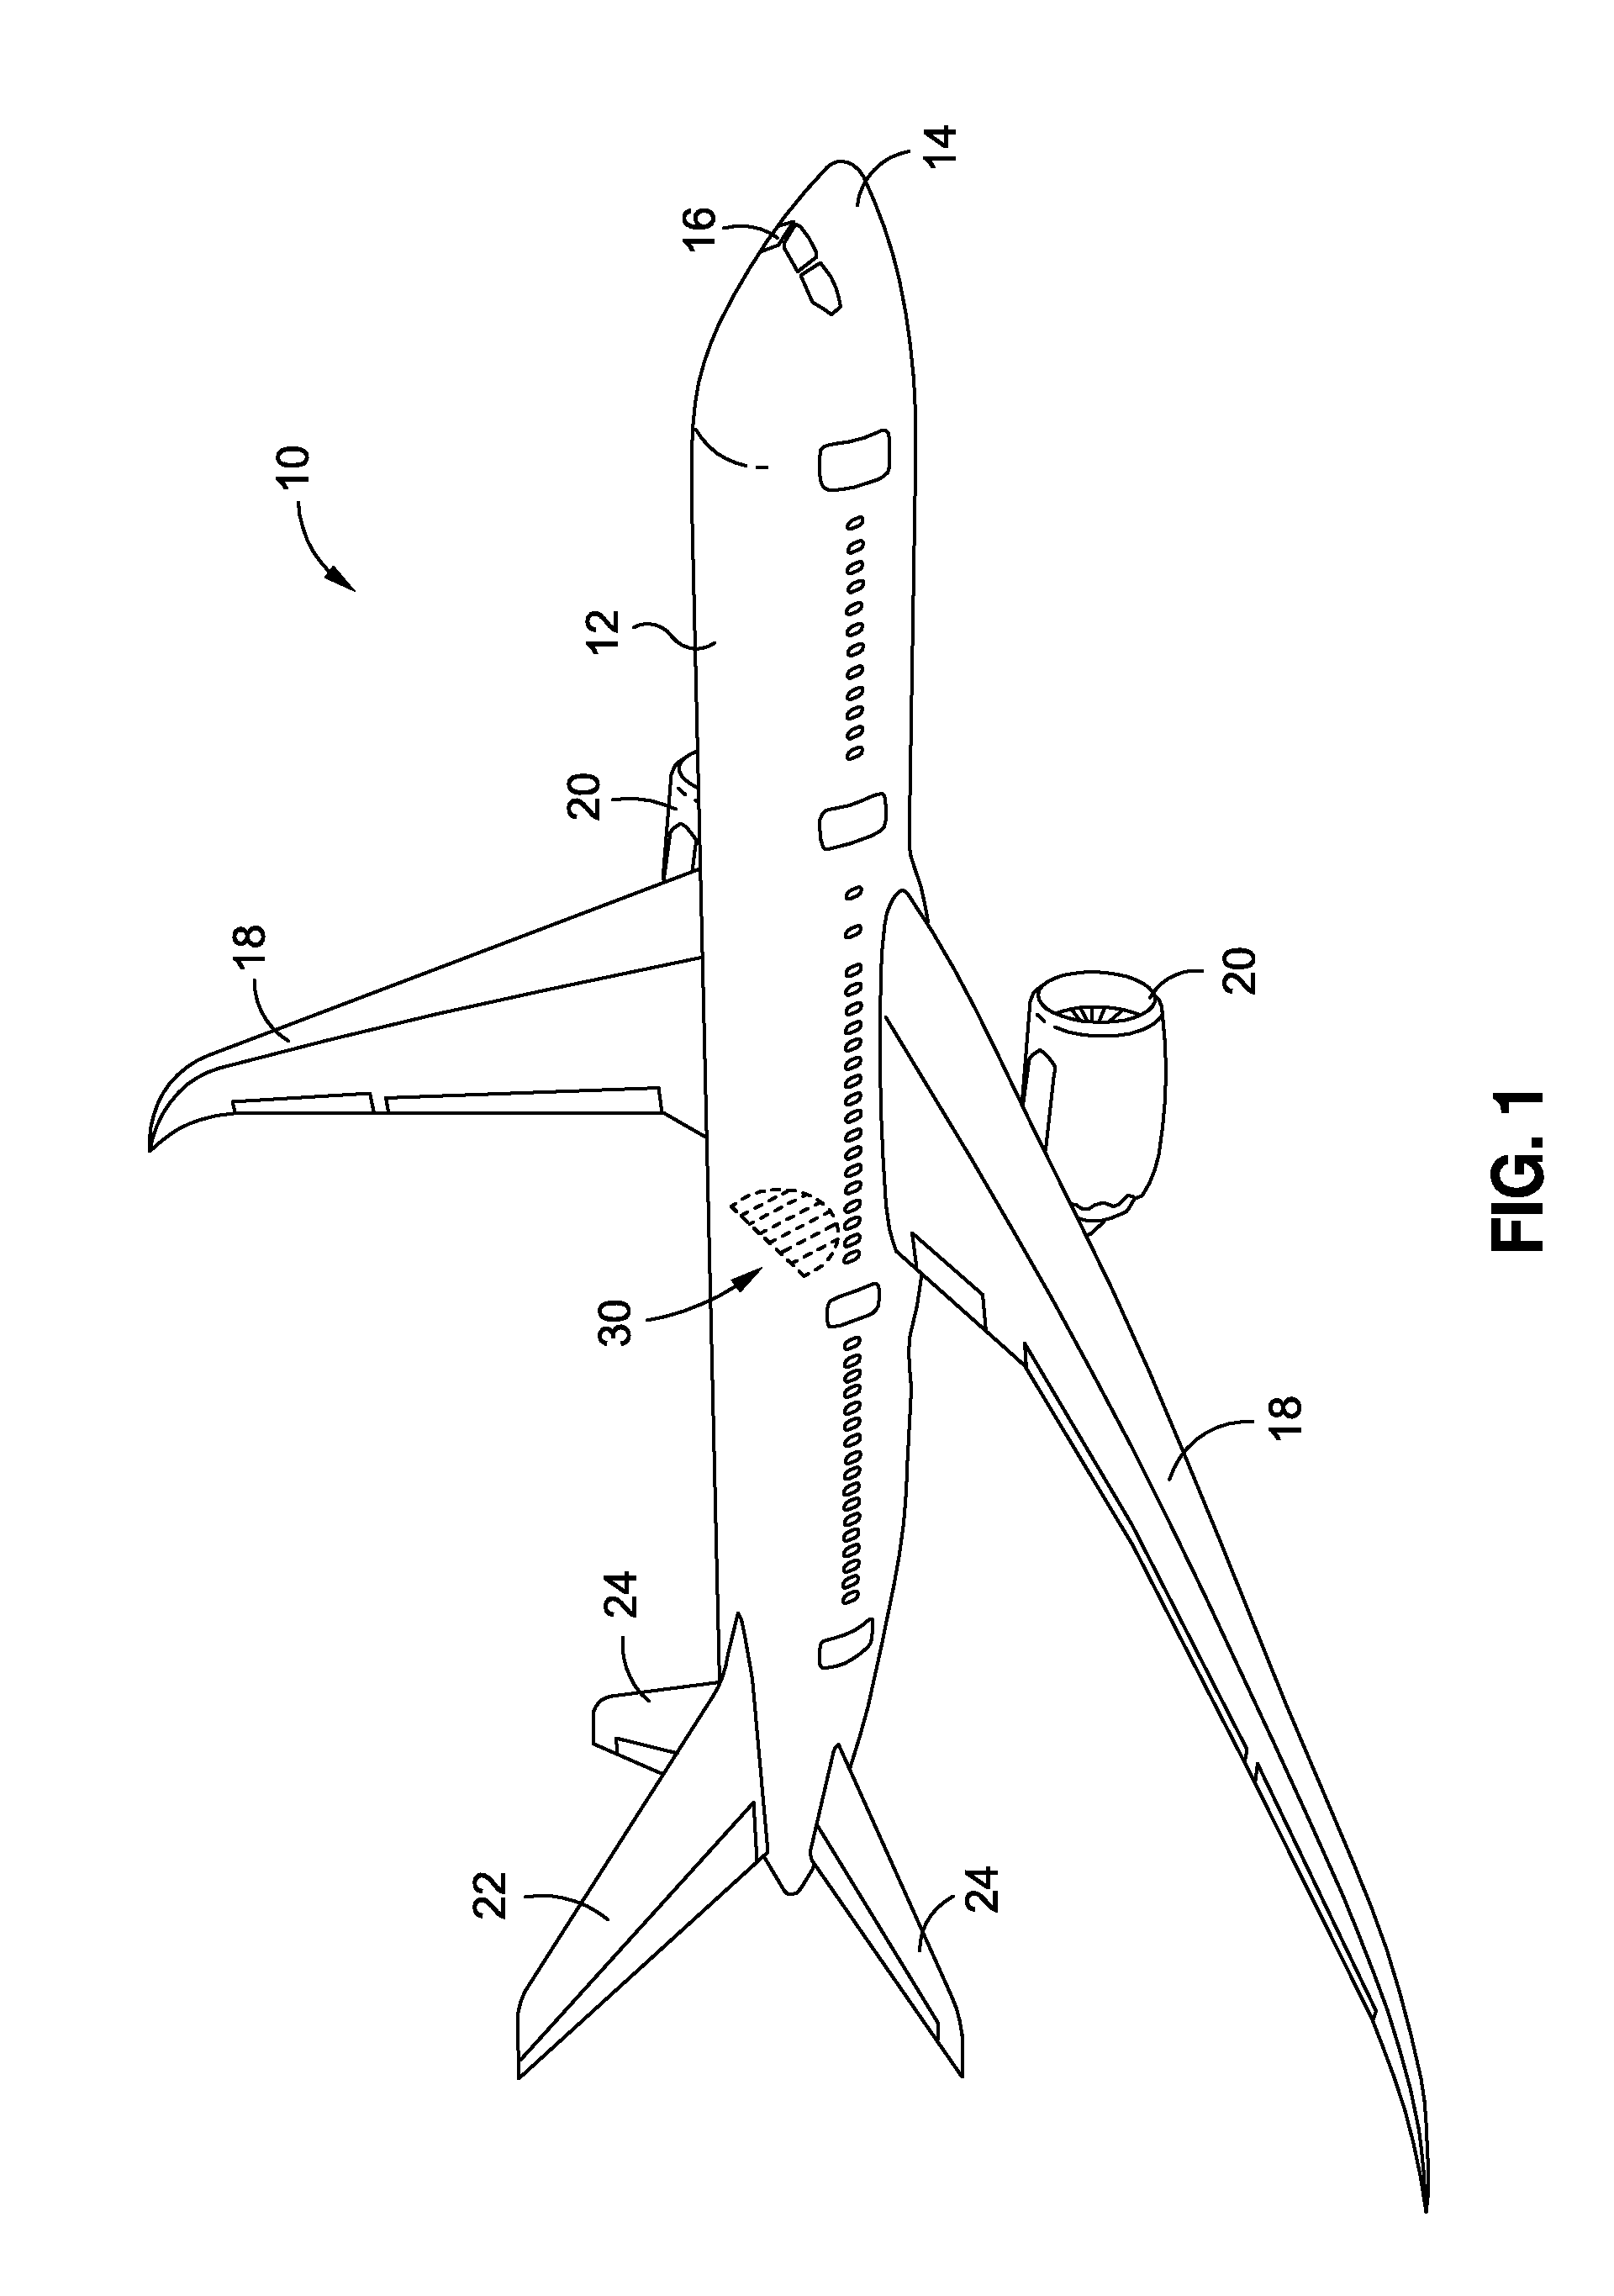 Composite Hat Stiffener, Composite Hat-Stiffened Pressure Webs, and Methods of Making the Same